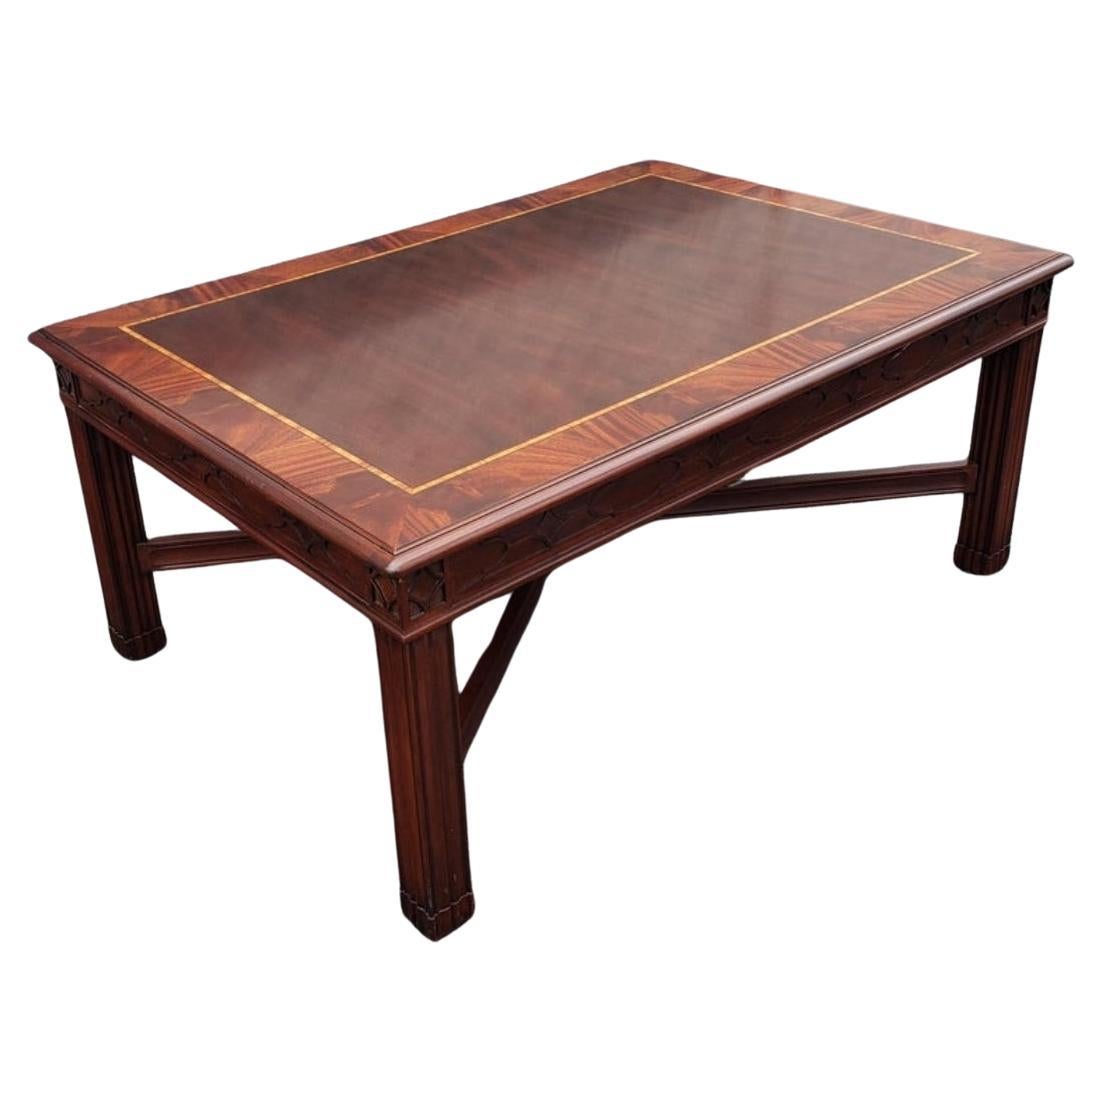 Henkel Harris Chippendale Mahogany and Tulipwood Inlay Coffee Table w/ Fretwork For Sale